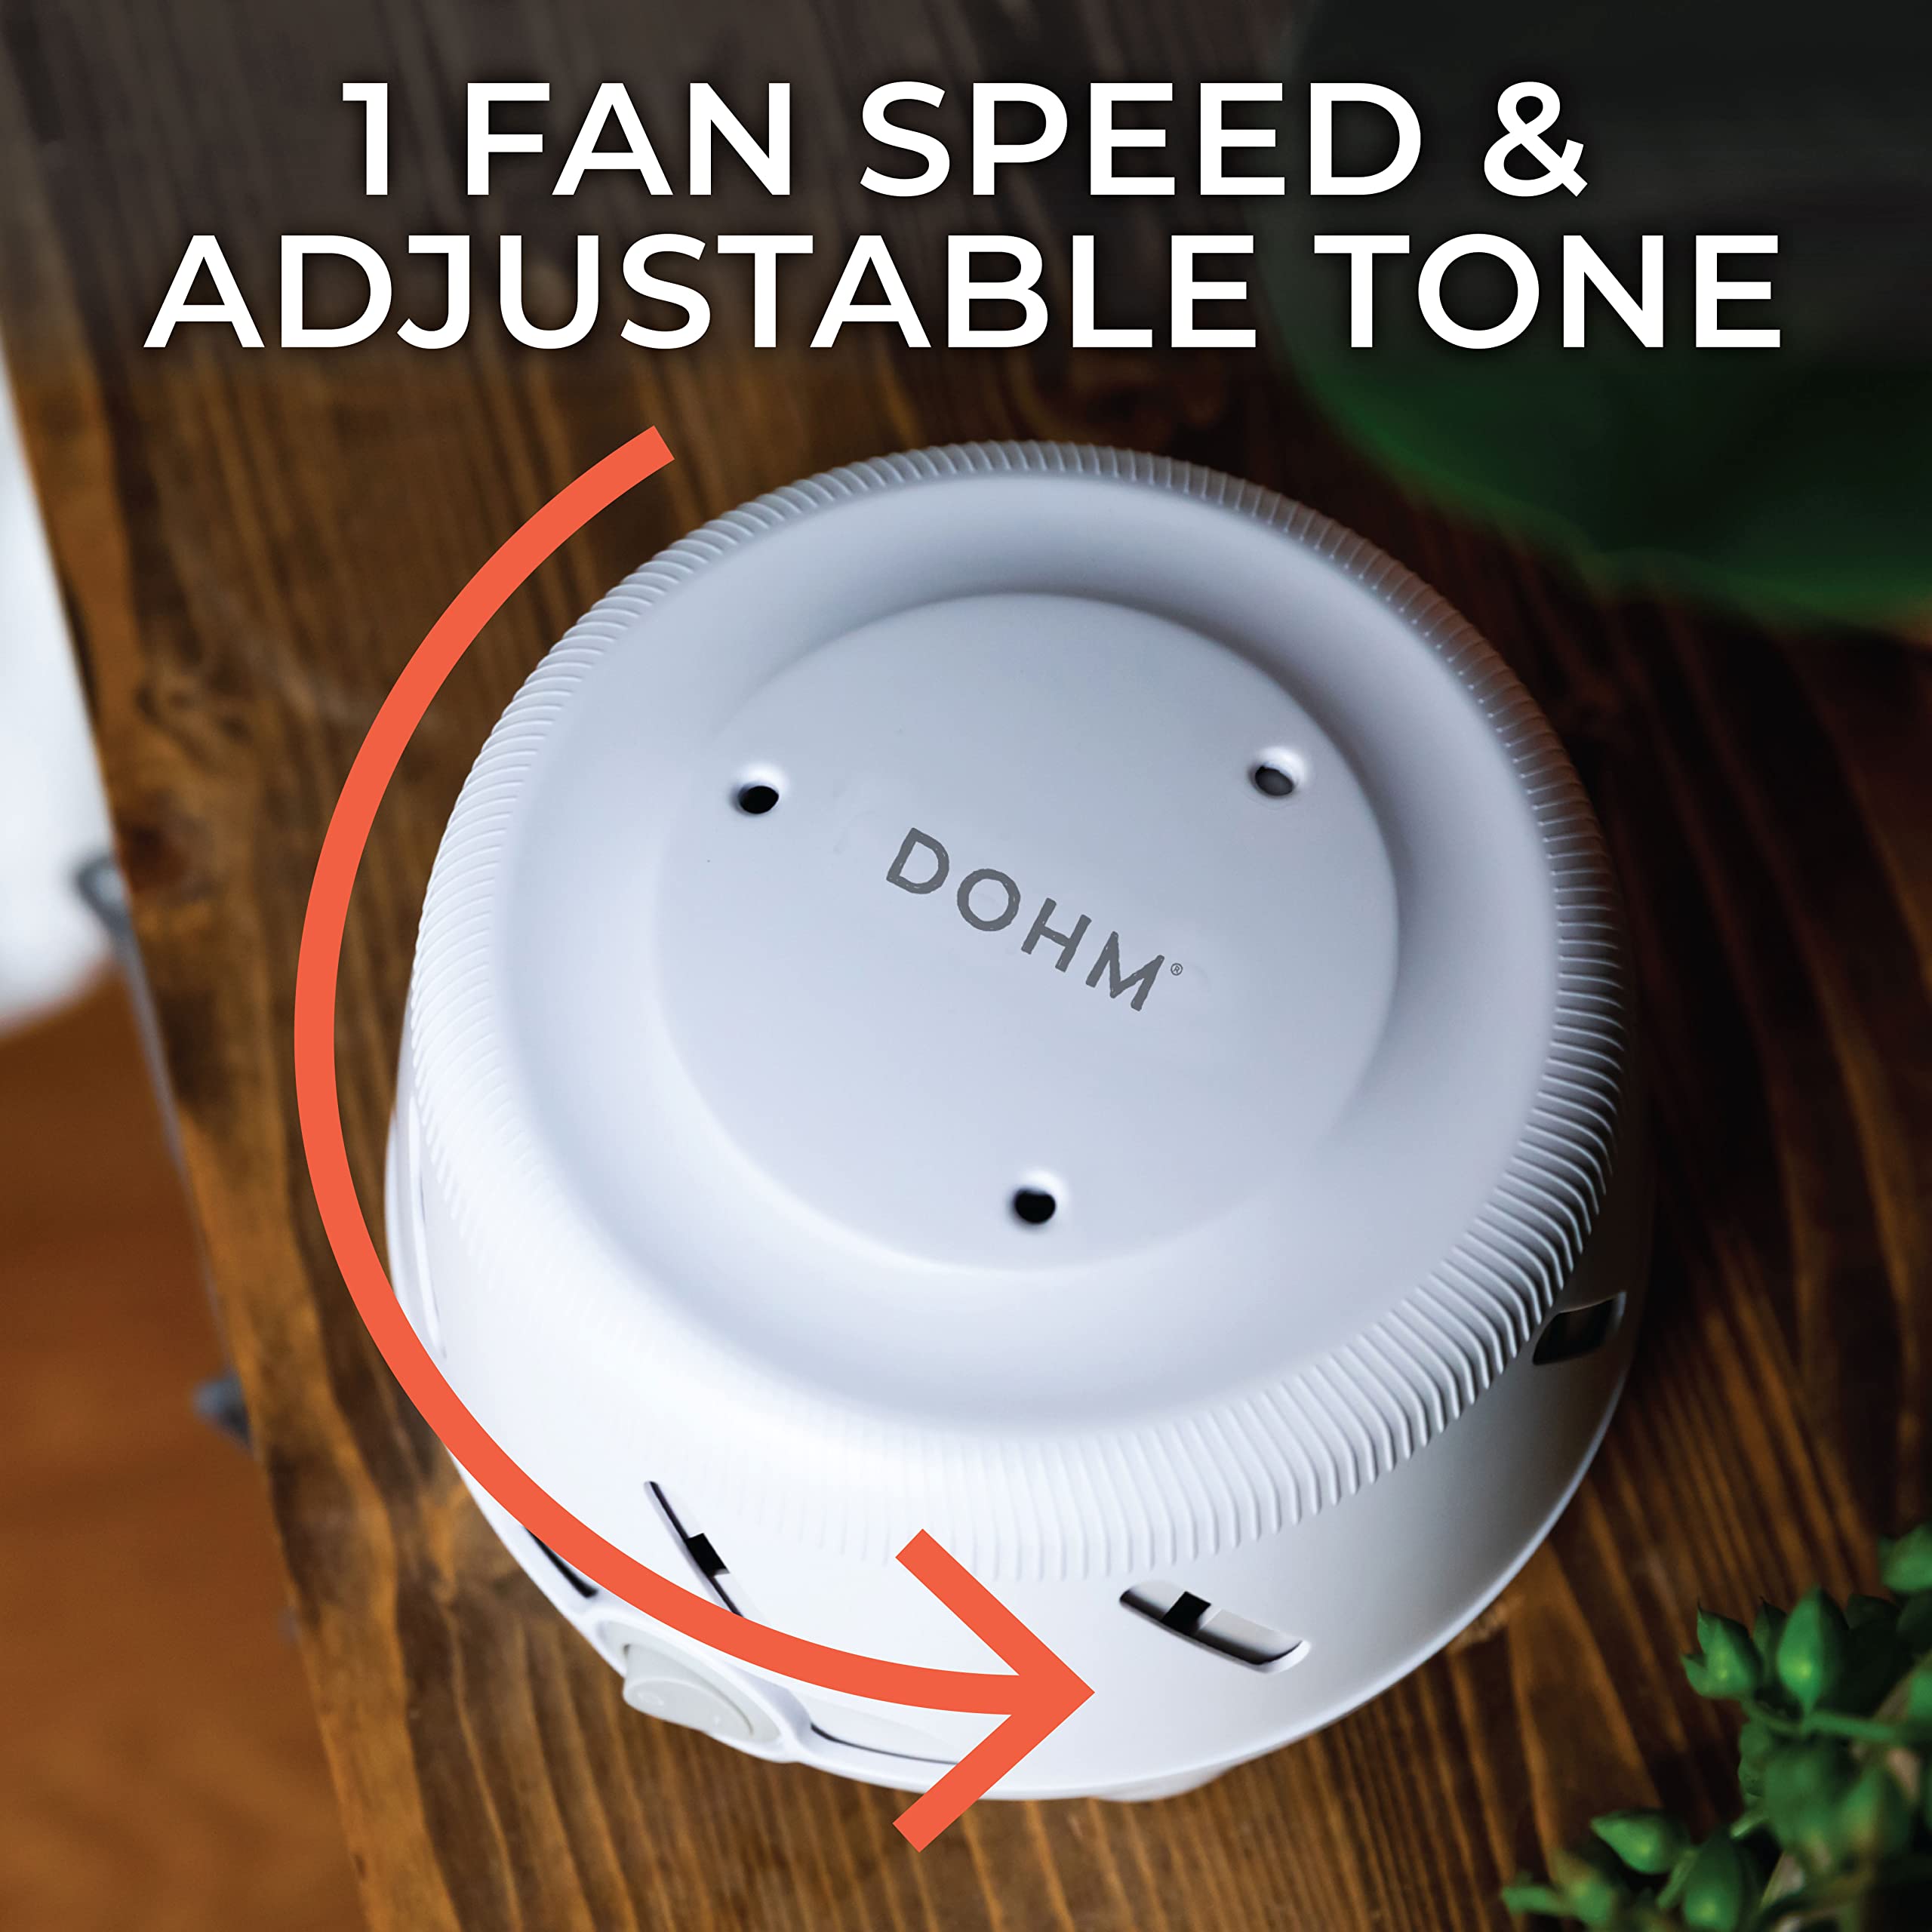 Marpac Dohm Uno White Noise Machine | real Fan Inside for Non-Looping White Noise | Sound Machine for Travel, Office privacy, Sleep Therapy | for Adults & baby | 101 Night Trial